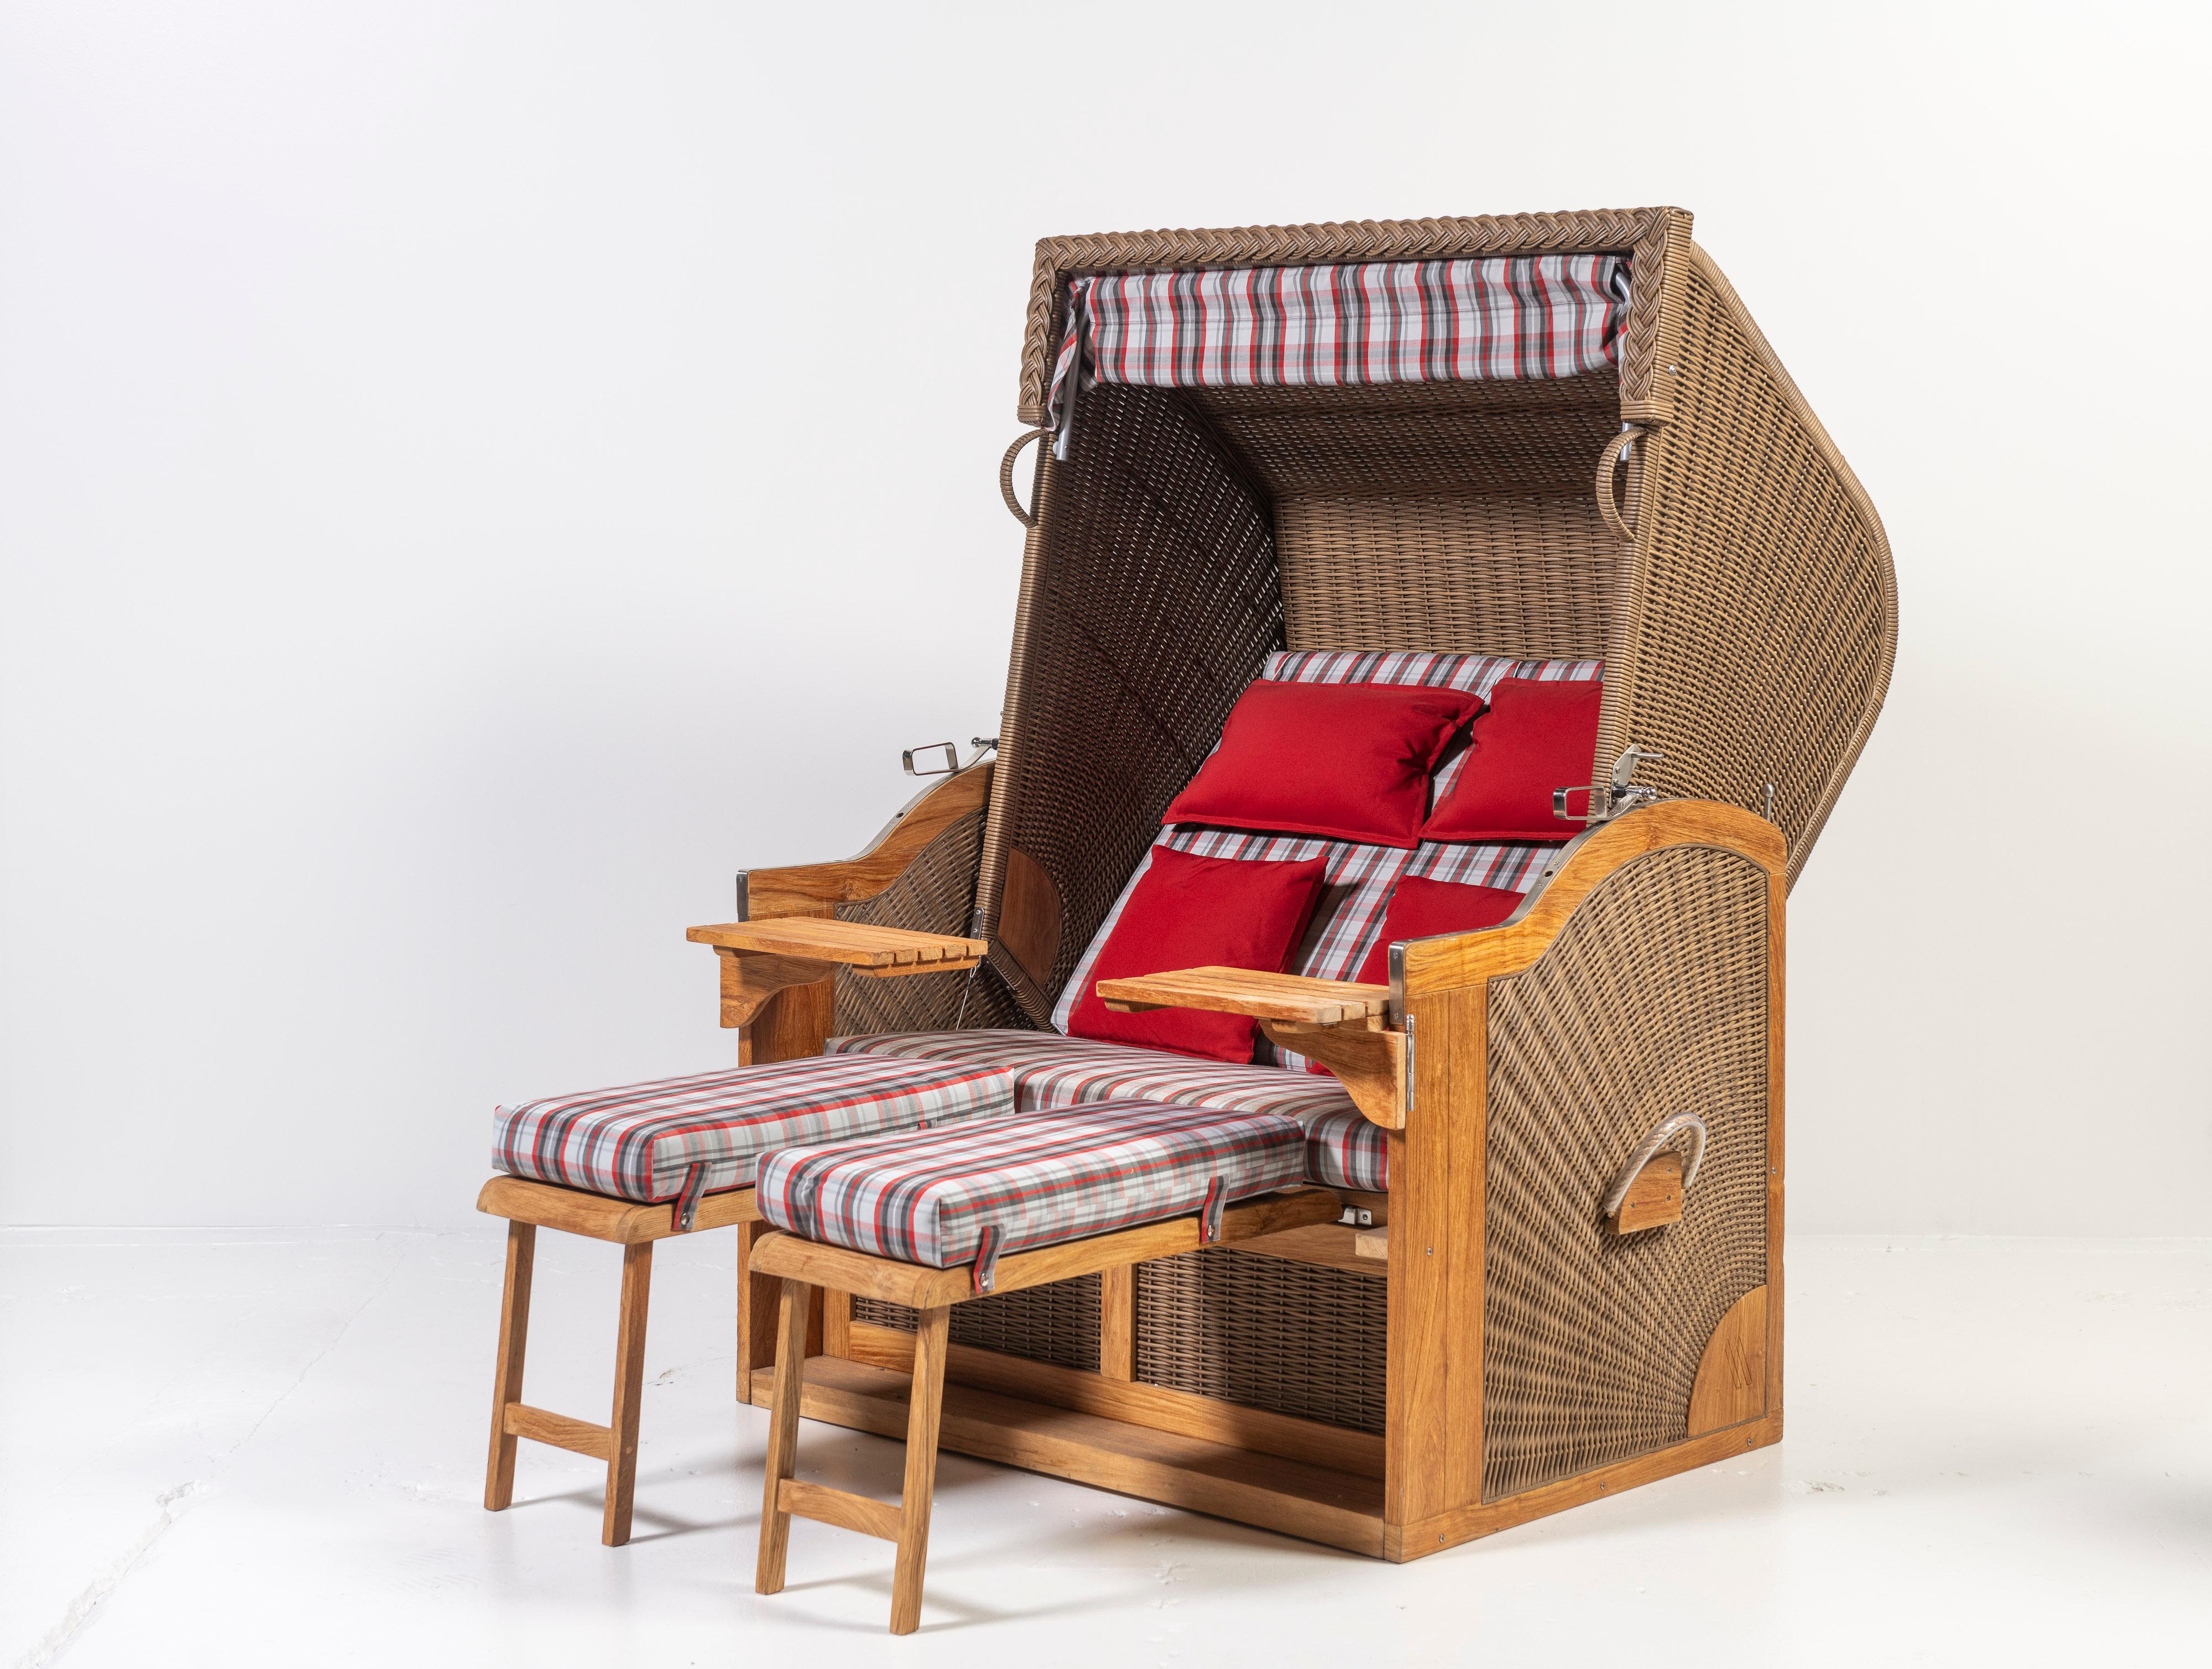 Manufactured by deVries of Germany, this stylist basket chair is a must for beach or slopes! Made of brushed teak, the body is intricately braided in a circular pattern on both sides of 6 mm flat band PE brand mesh, which is fully recycled and